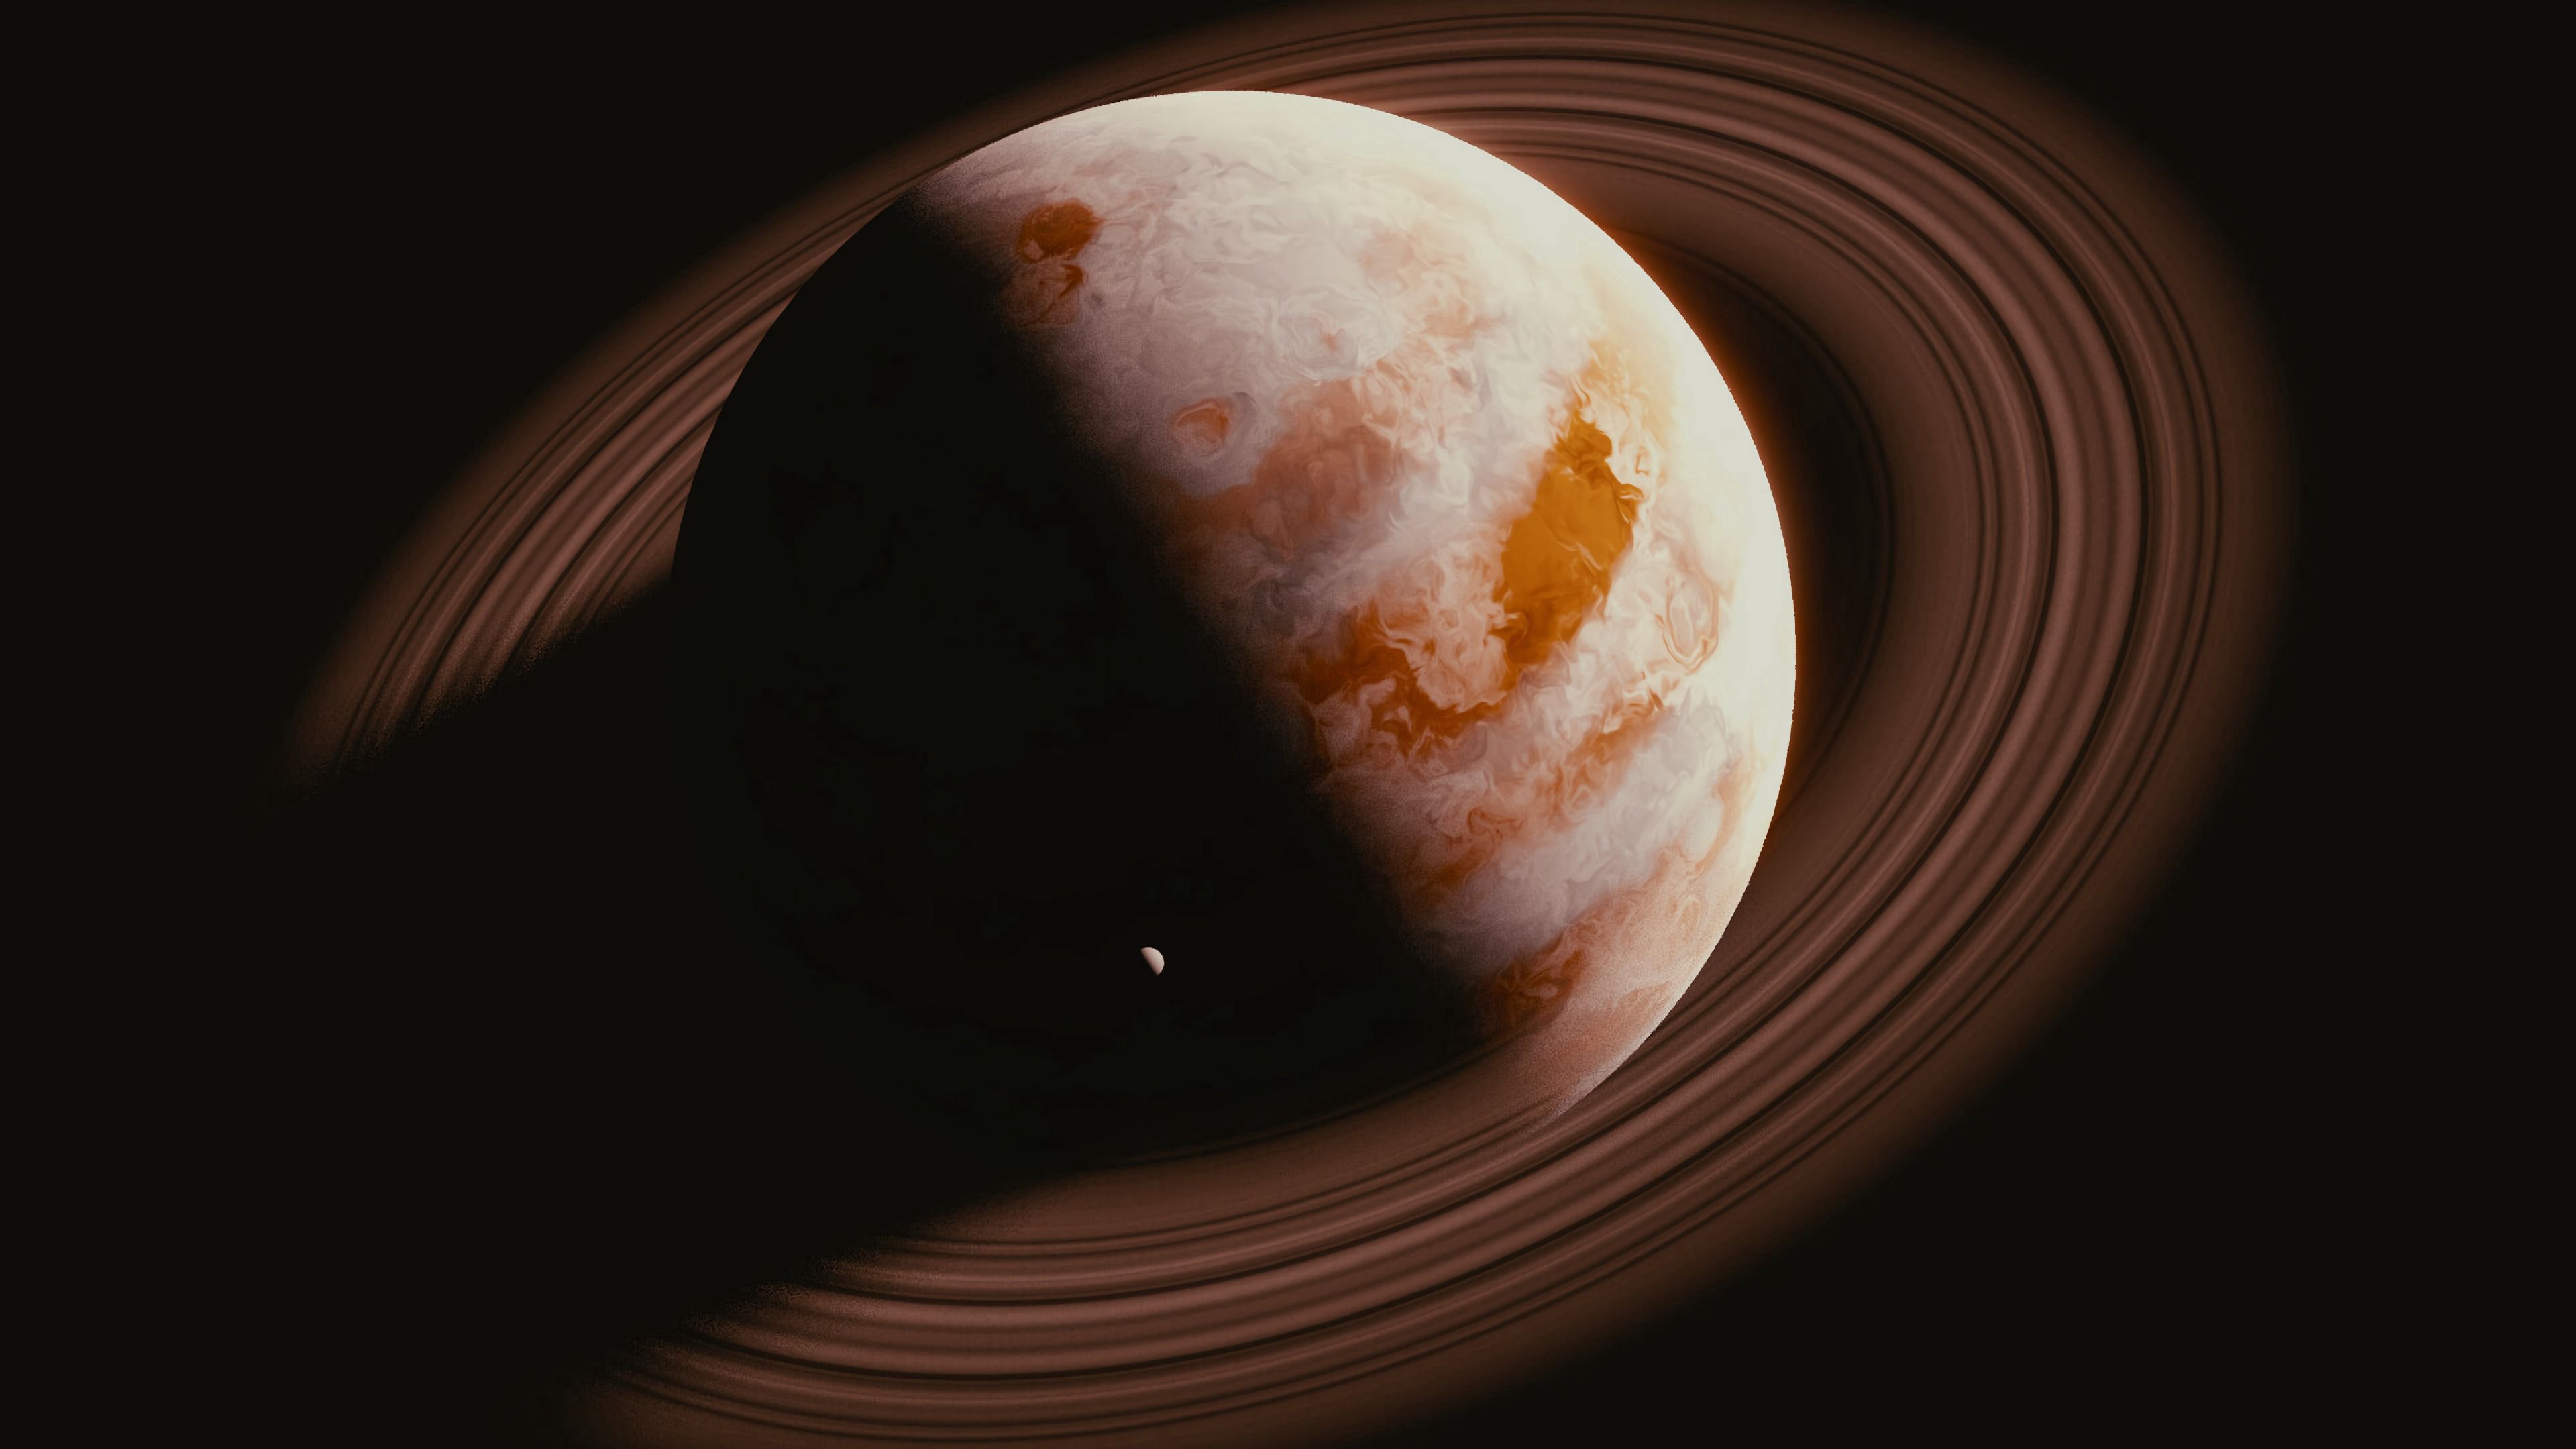 150474 download wallpaper universe, rings, planet, saturn screensavers and pictures for free